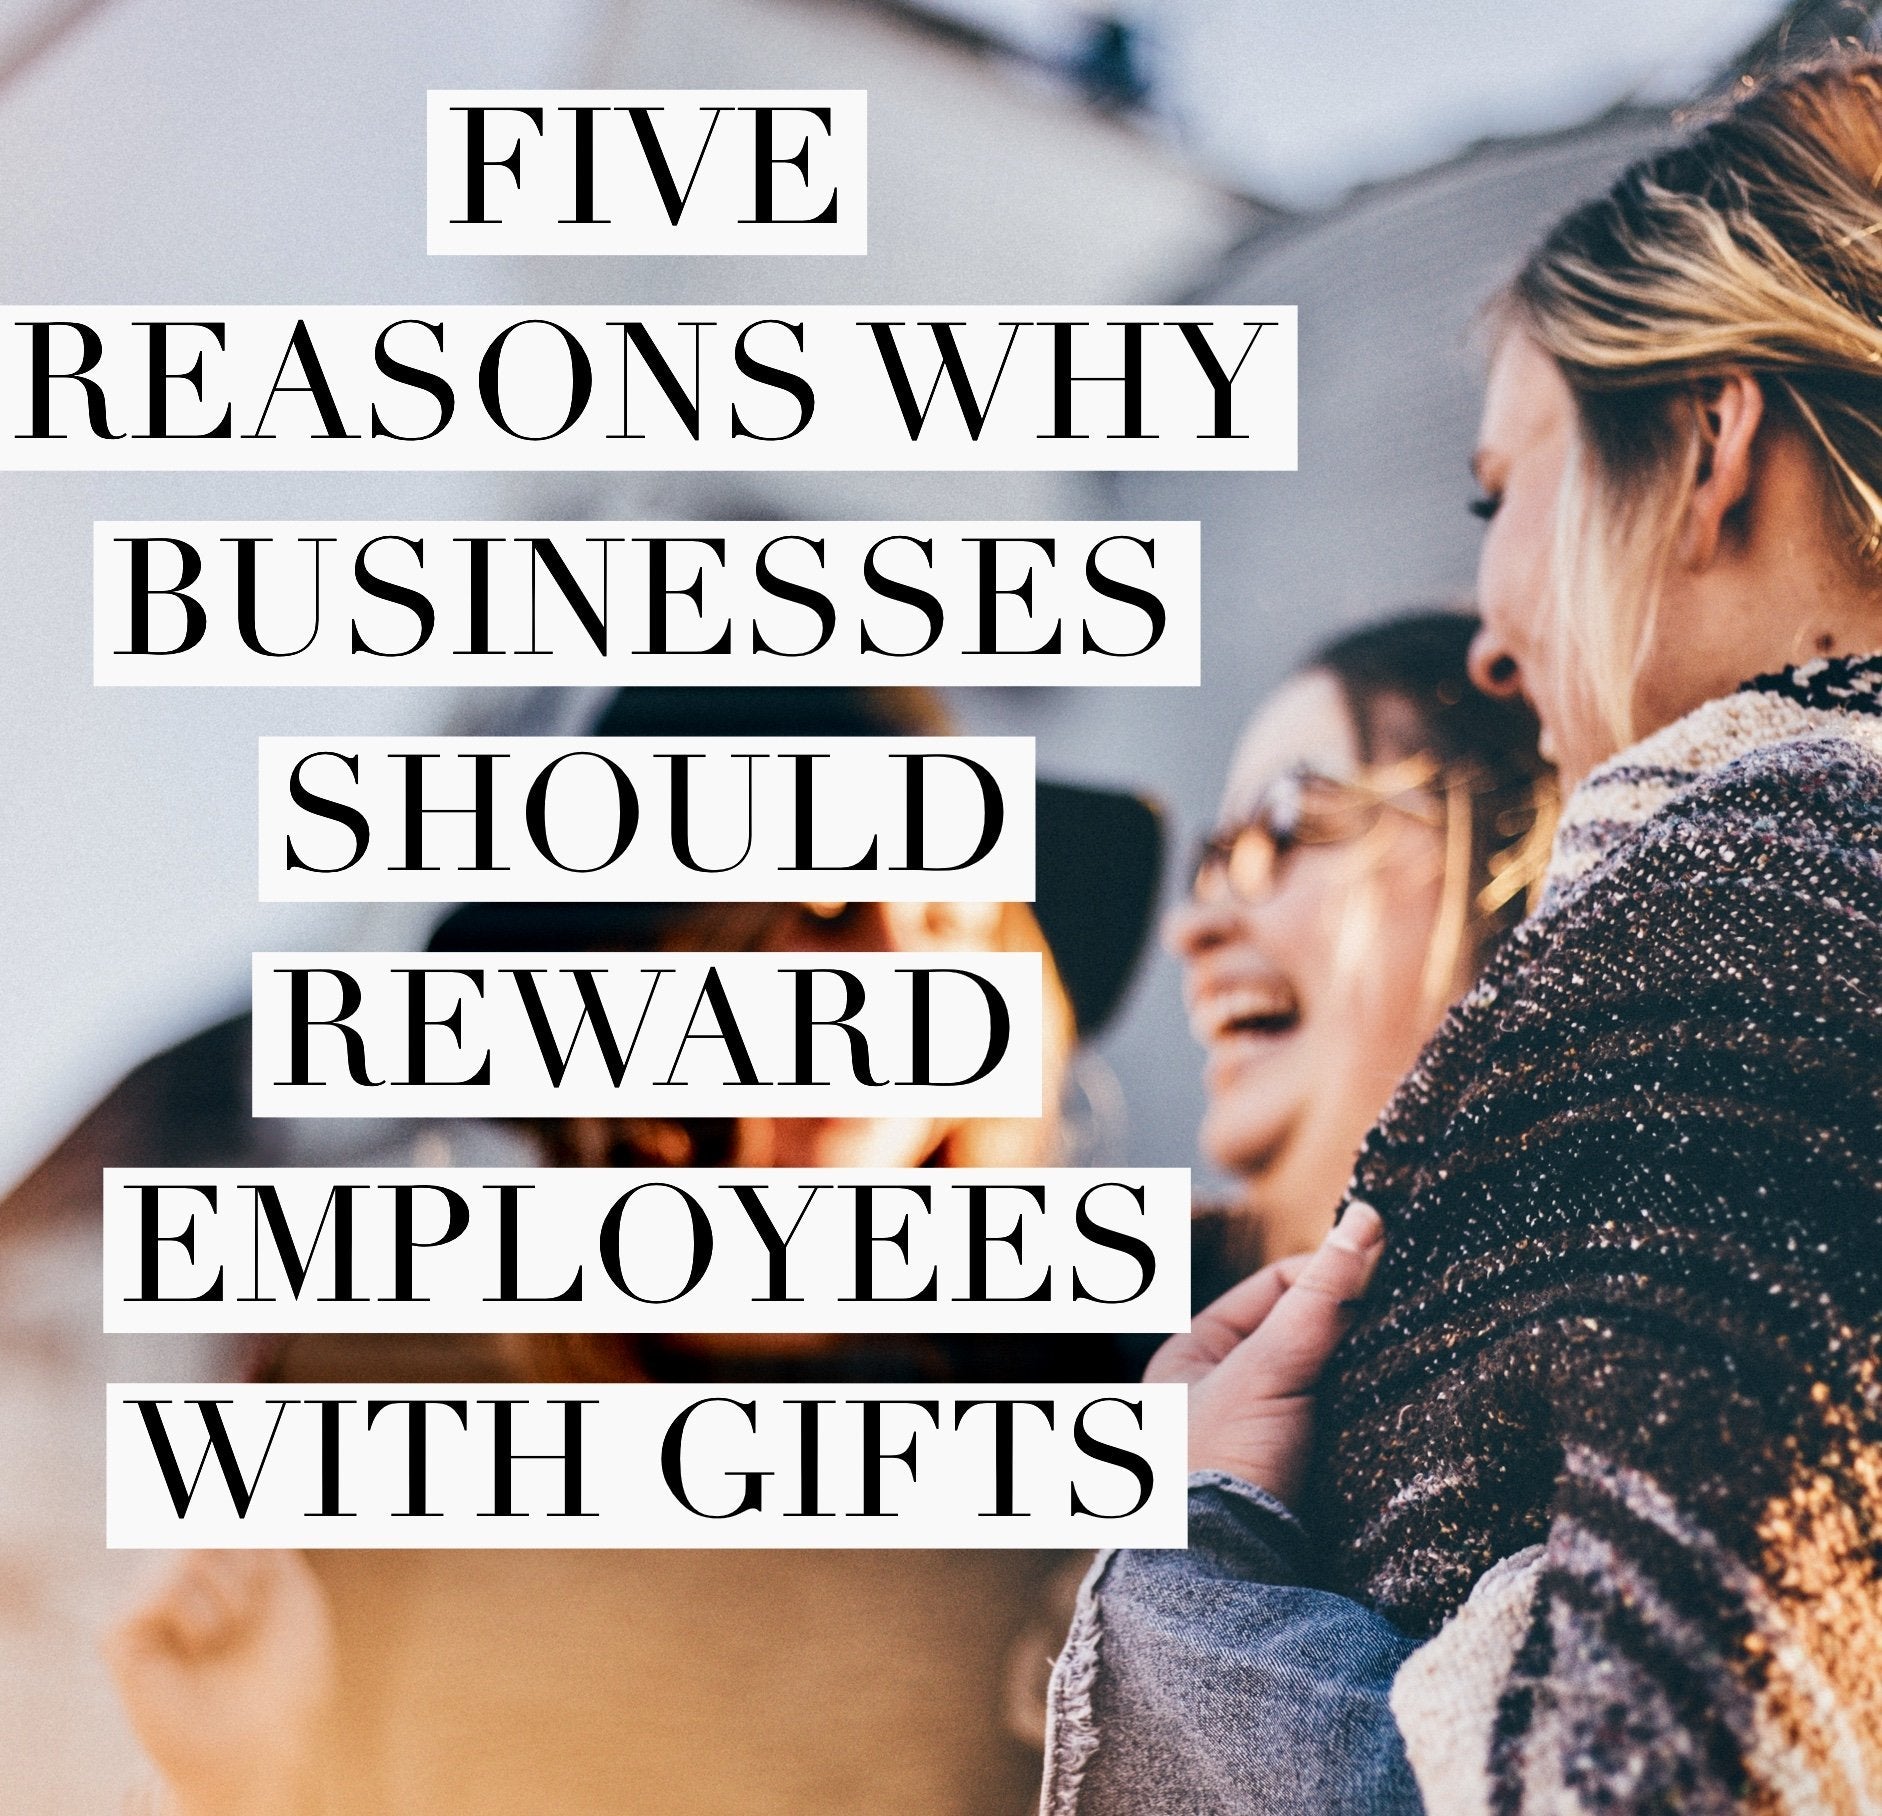 Five reasons why businesses should reward employees with gifts | Social Stories Club